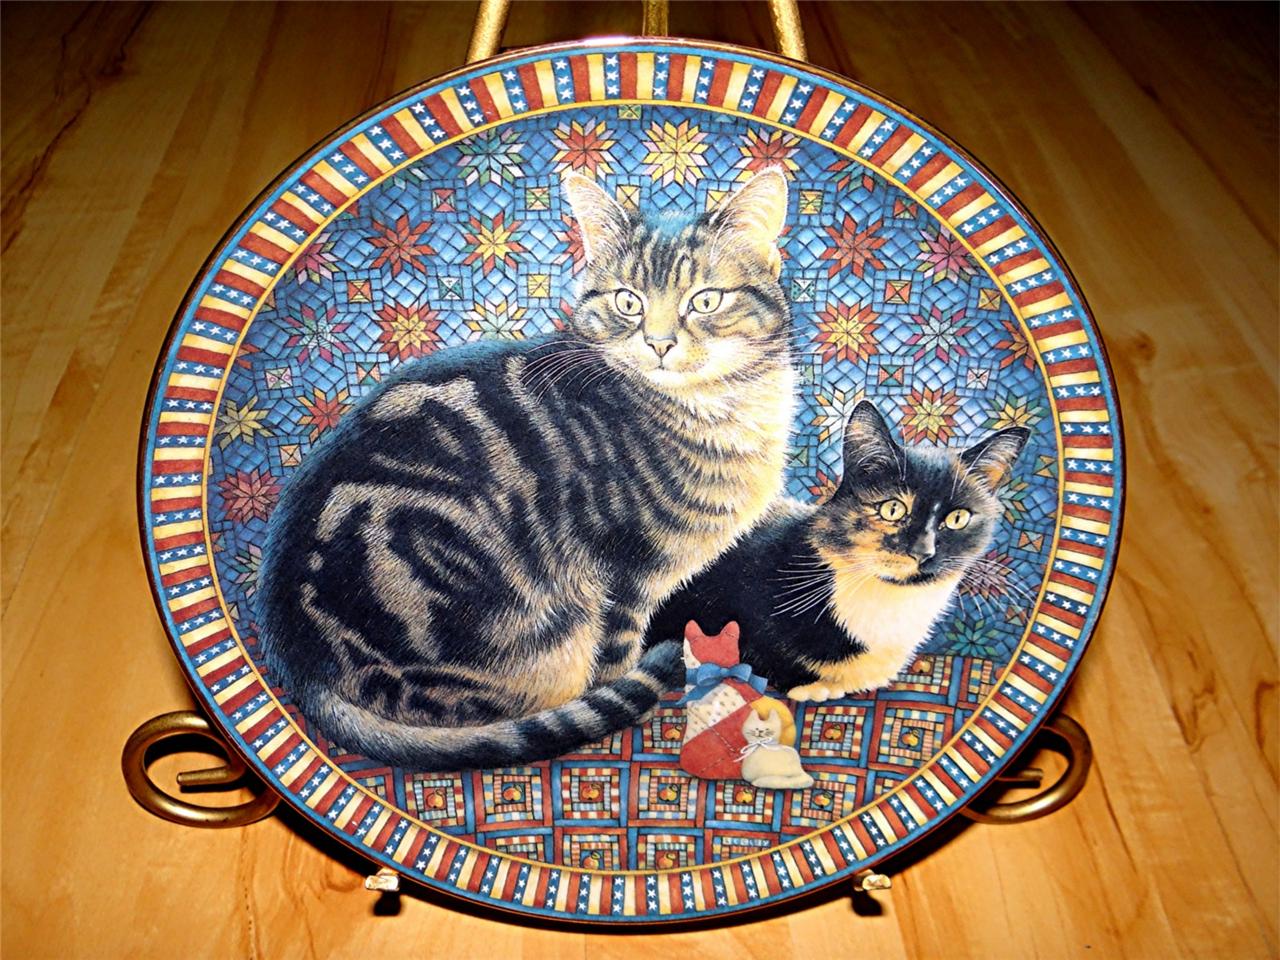 "Octopussy & Motley in America" CATS AROUND THE WORLD Lesley Anne Ivory Plate